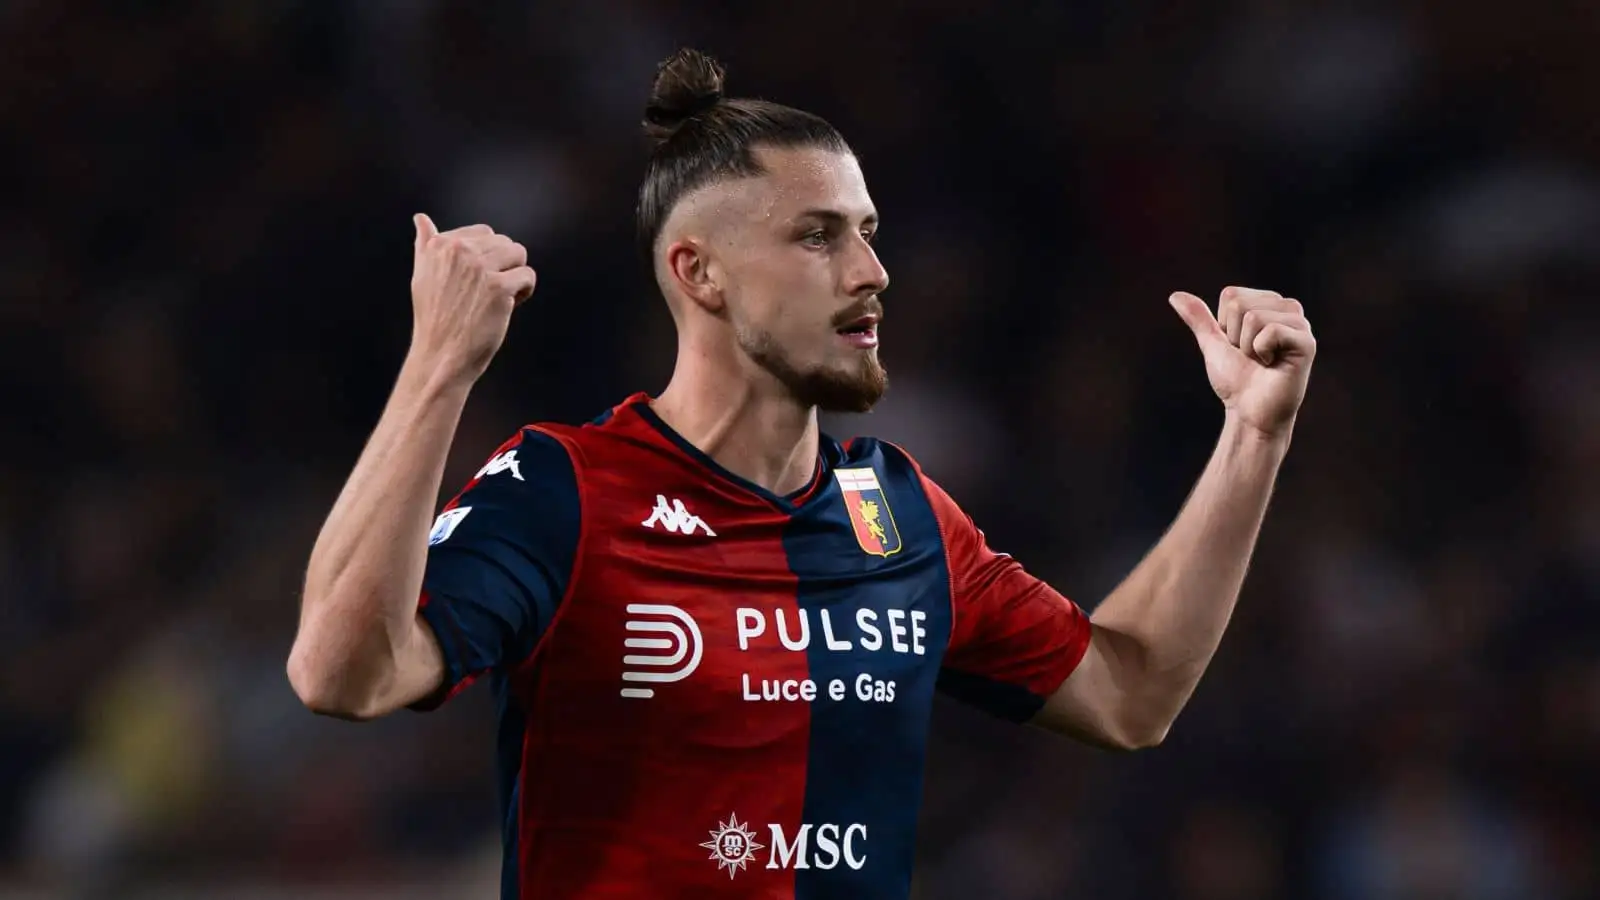 Radu Dragusin of Genoa CFC gestures during the Serie A football match between Genoa CFC and AS Roma